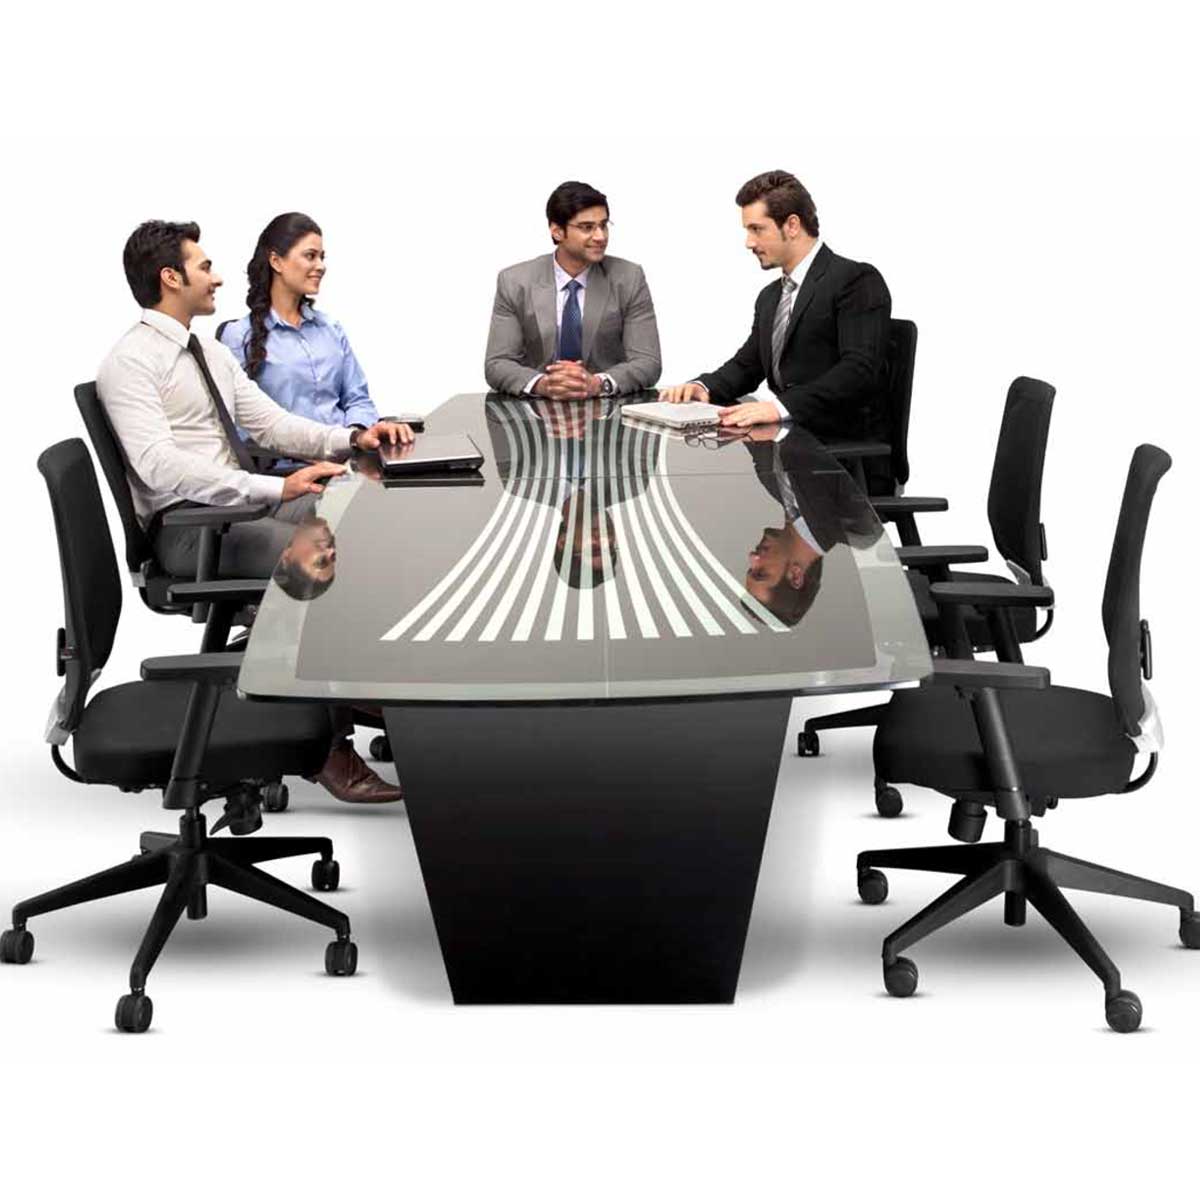 Metal Office Table Manufacturers, Suppliers in Karkardooma